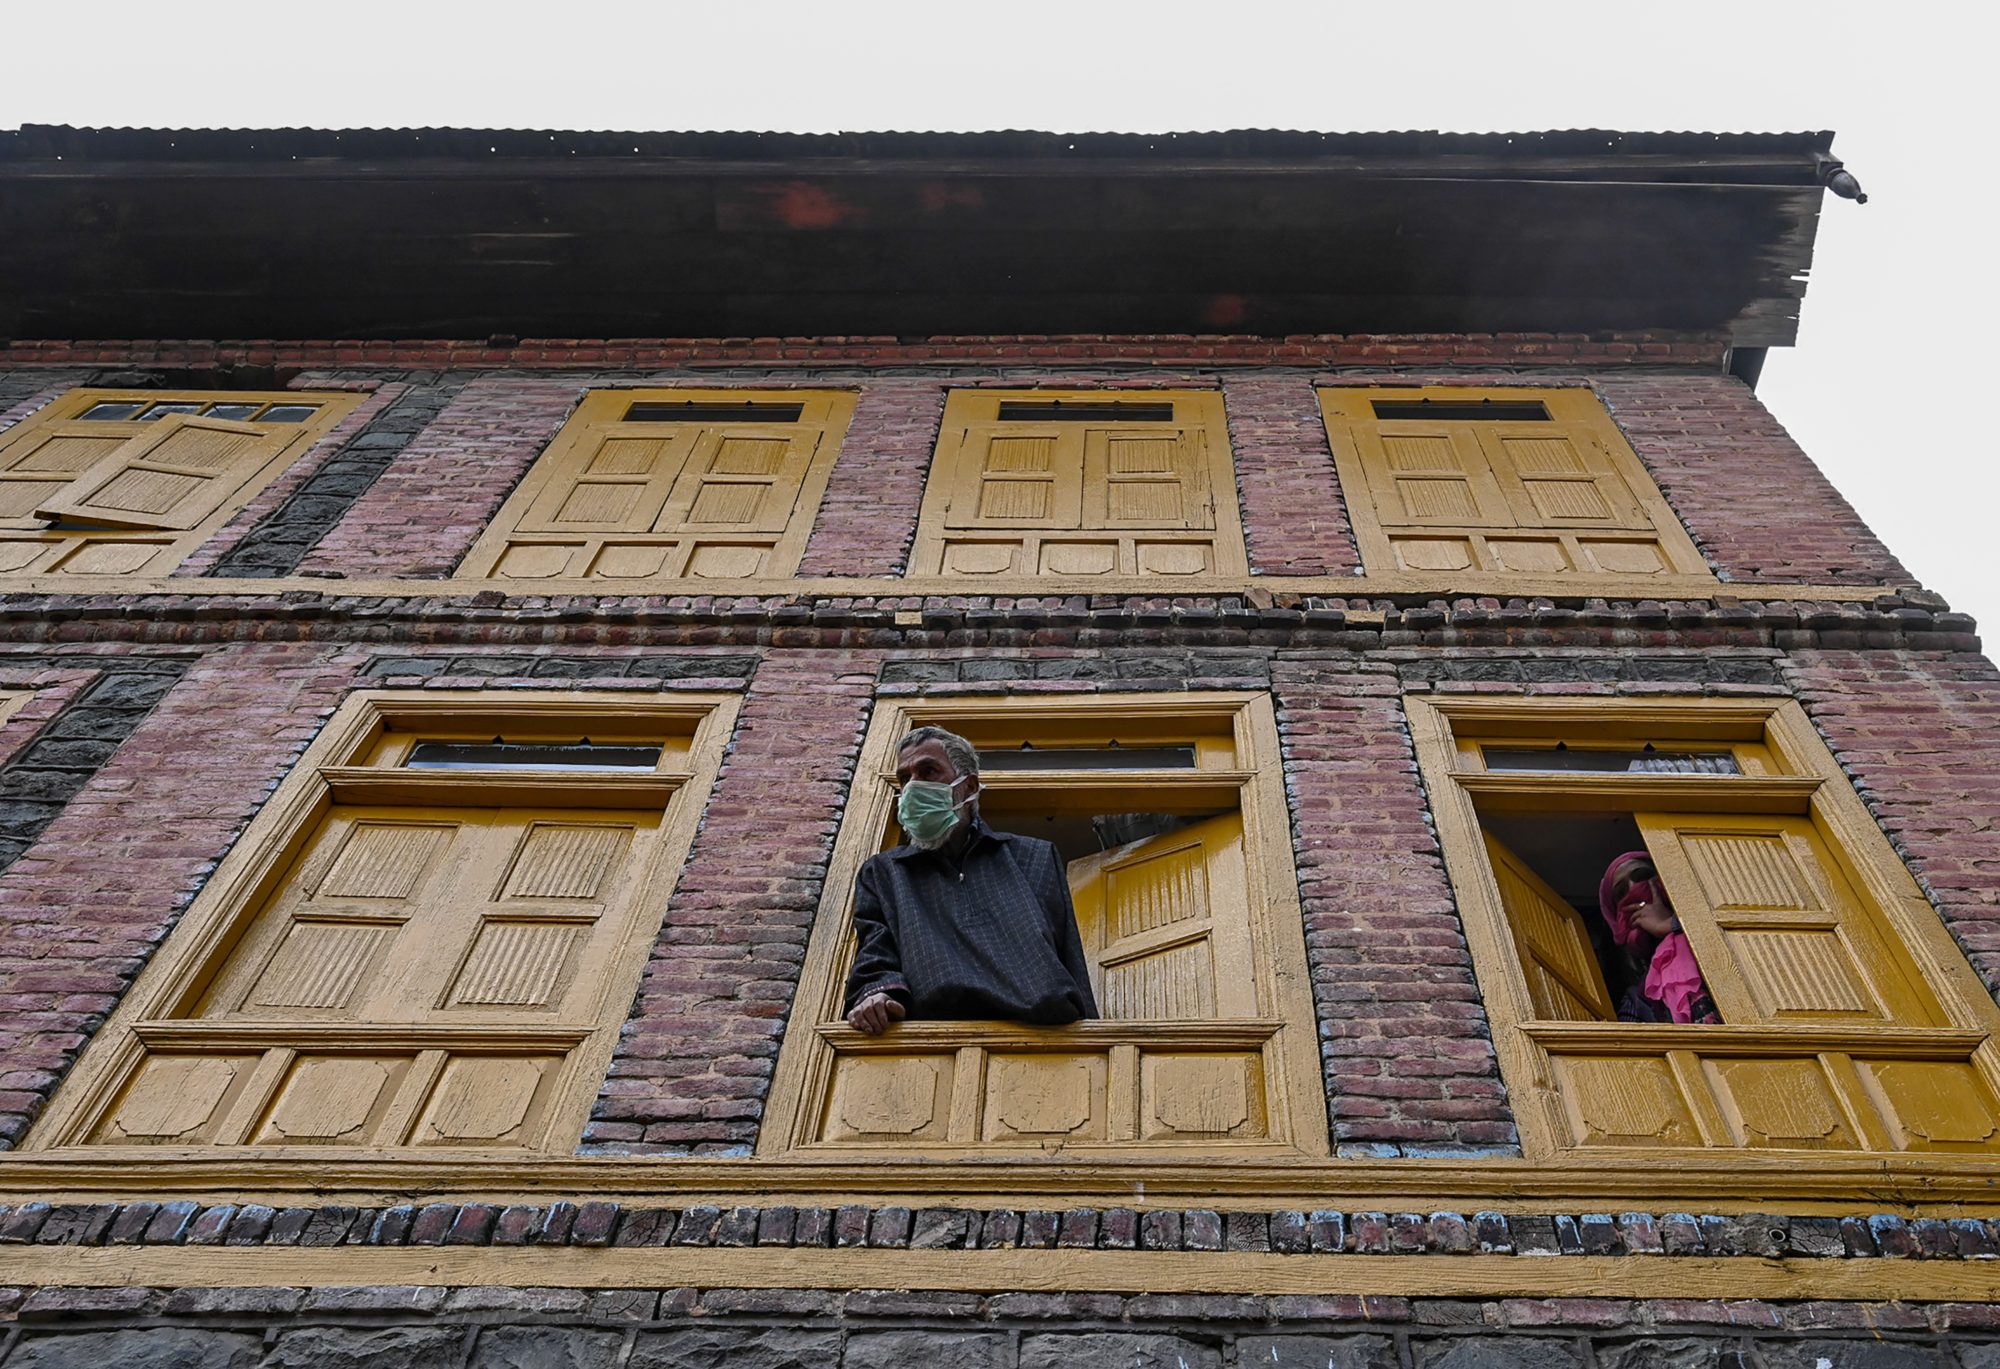 People look out from their windows in a residential area of Srinagar declared as a 'red zone' for coronavirus by authorities on 8 April 2020 (AFP)